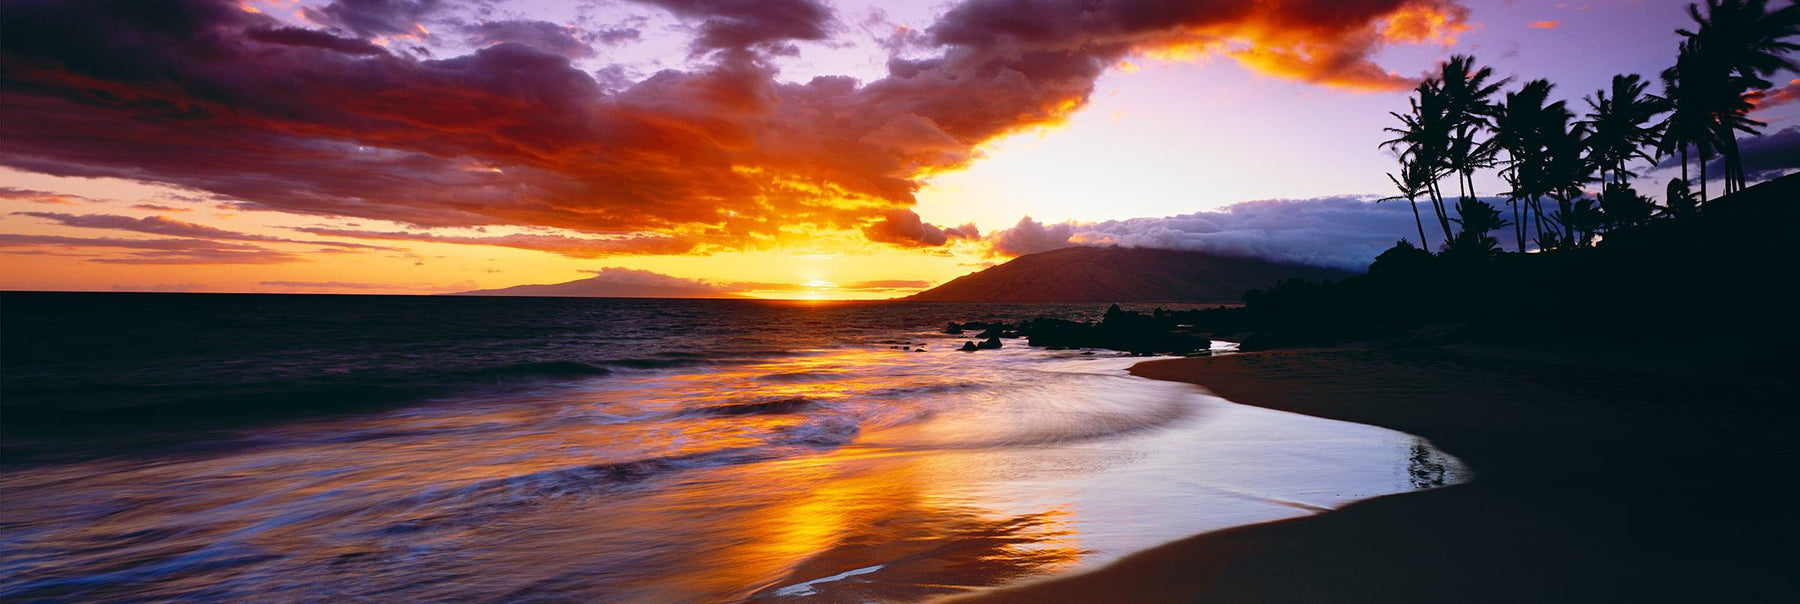 Waves crashing along the sand at Kihei Beach with the sun setting through the clouds in the background